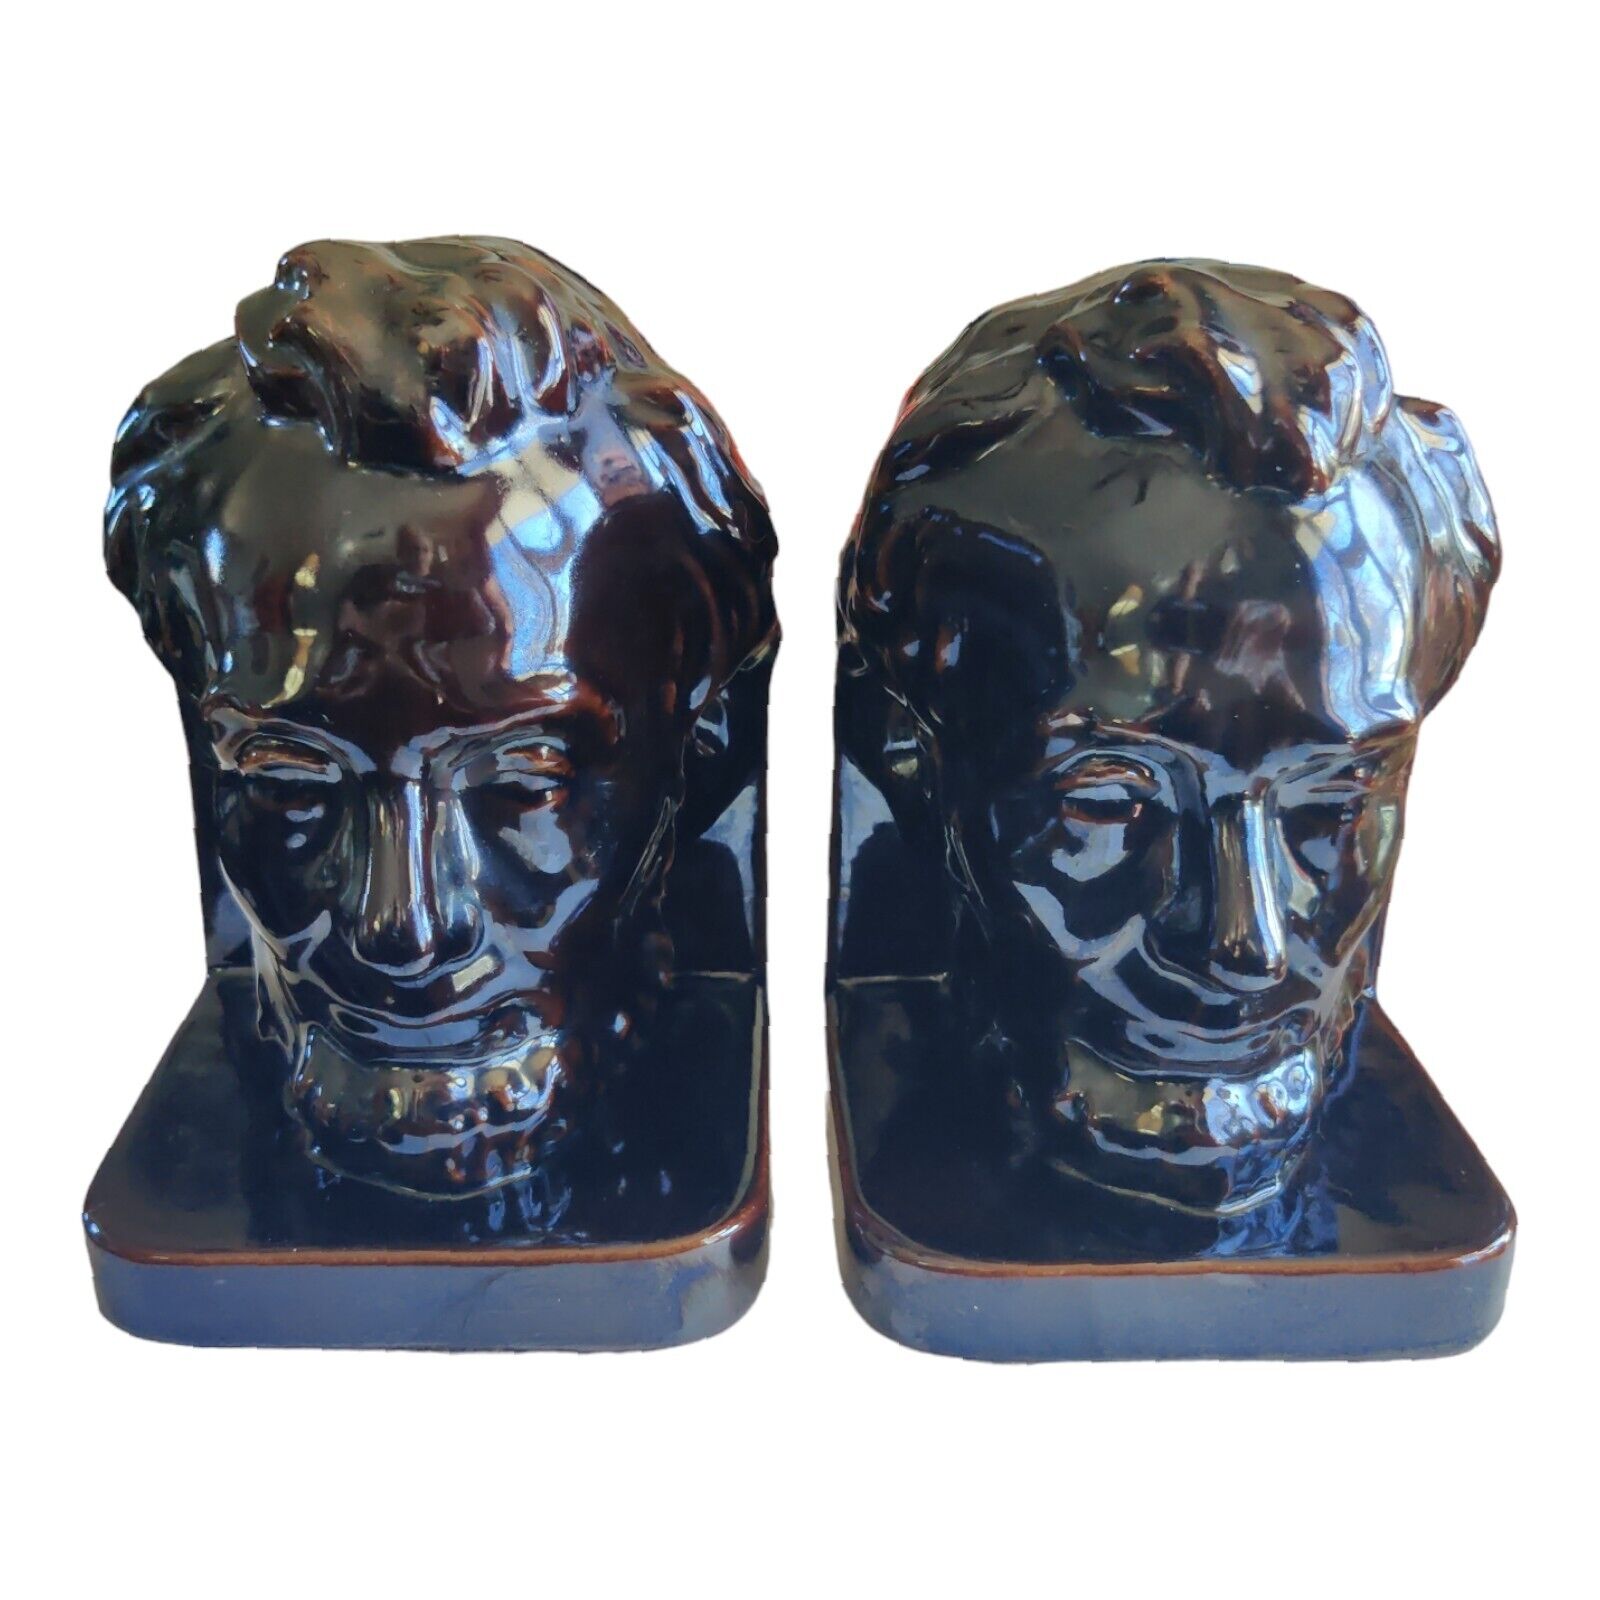 Vintage Abe Lincoln Bookend Pair Brown Ceramic Bookends Set Large Face